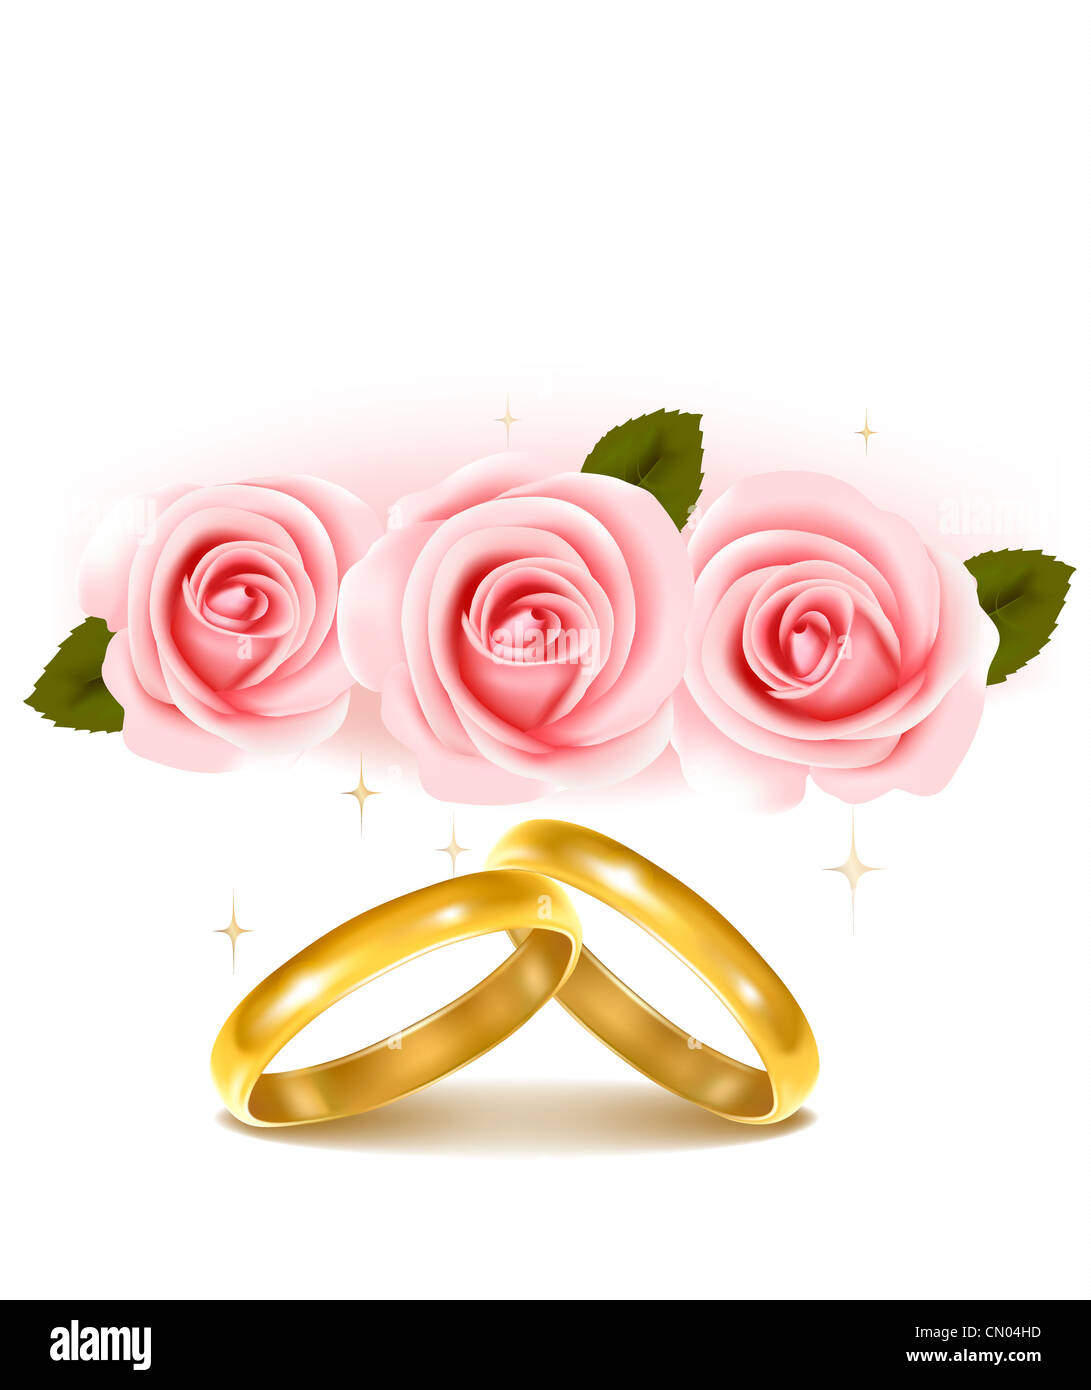 Background with wedding rings and roses bouquet Stock Photo - Alamy